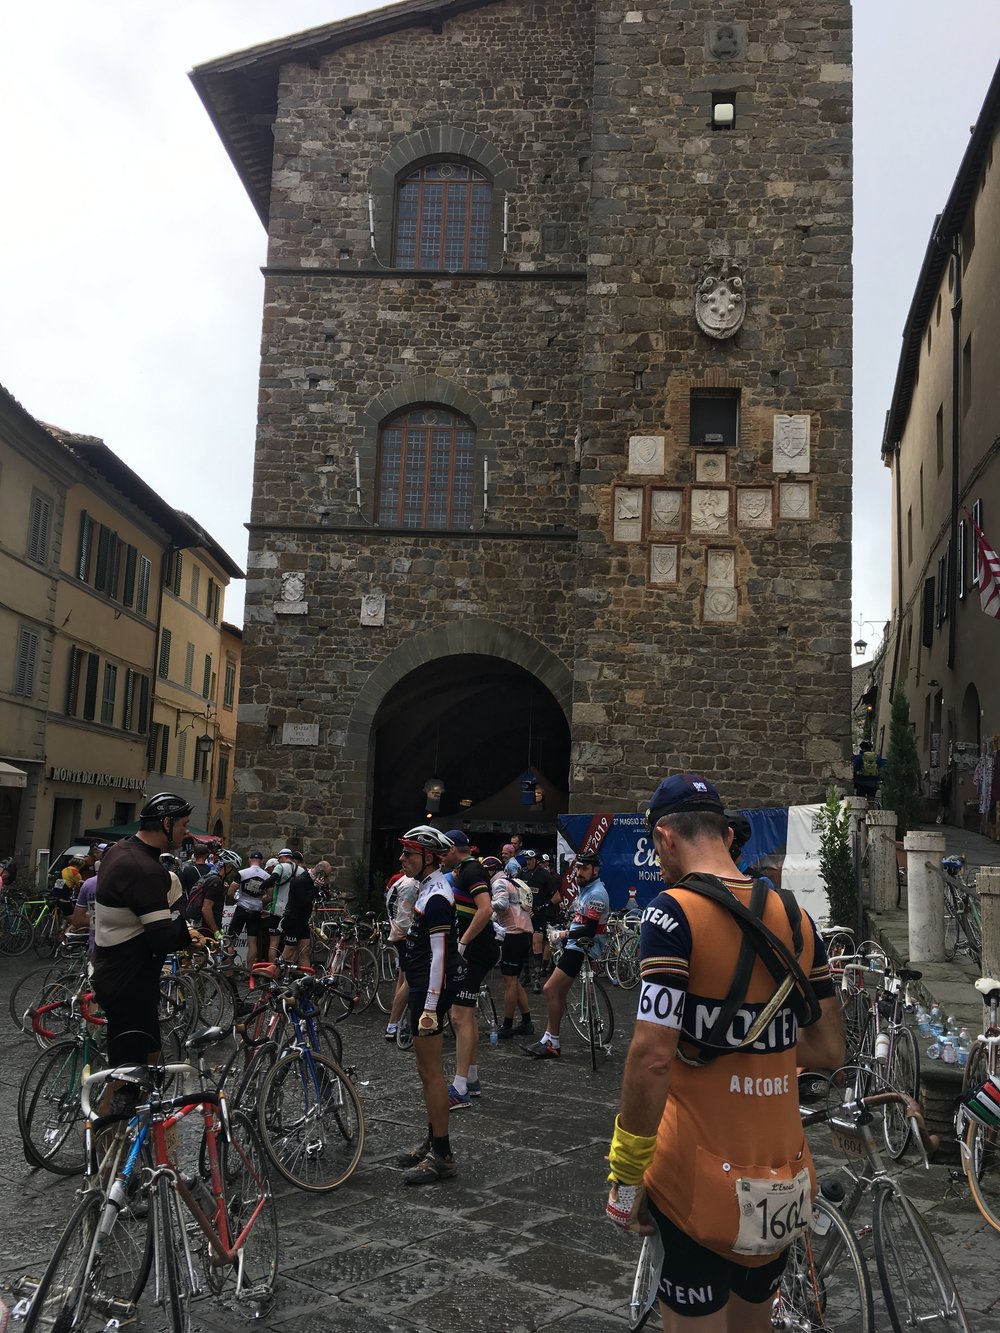 Montalcino was a tough climb and great descent